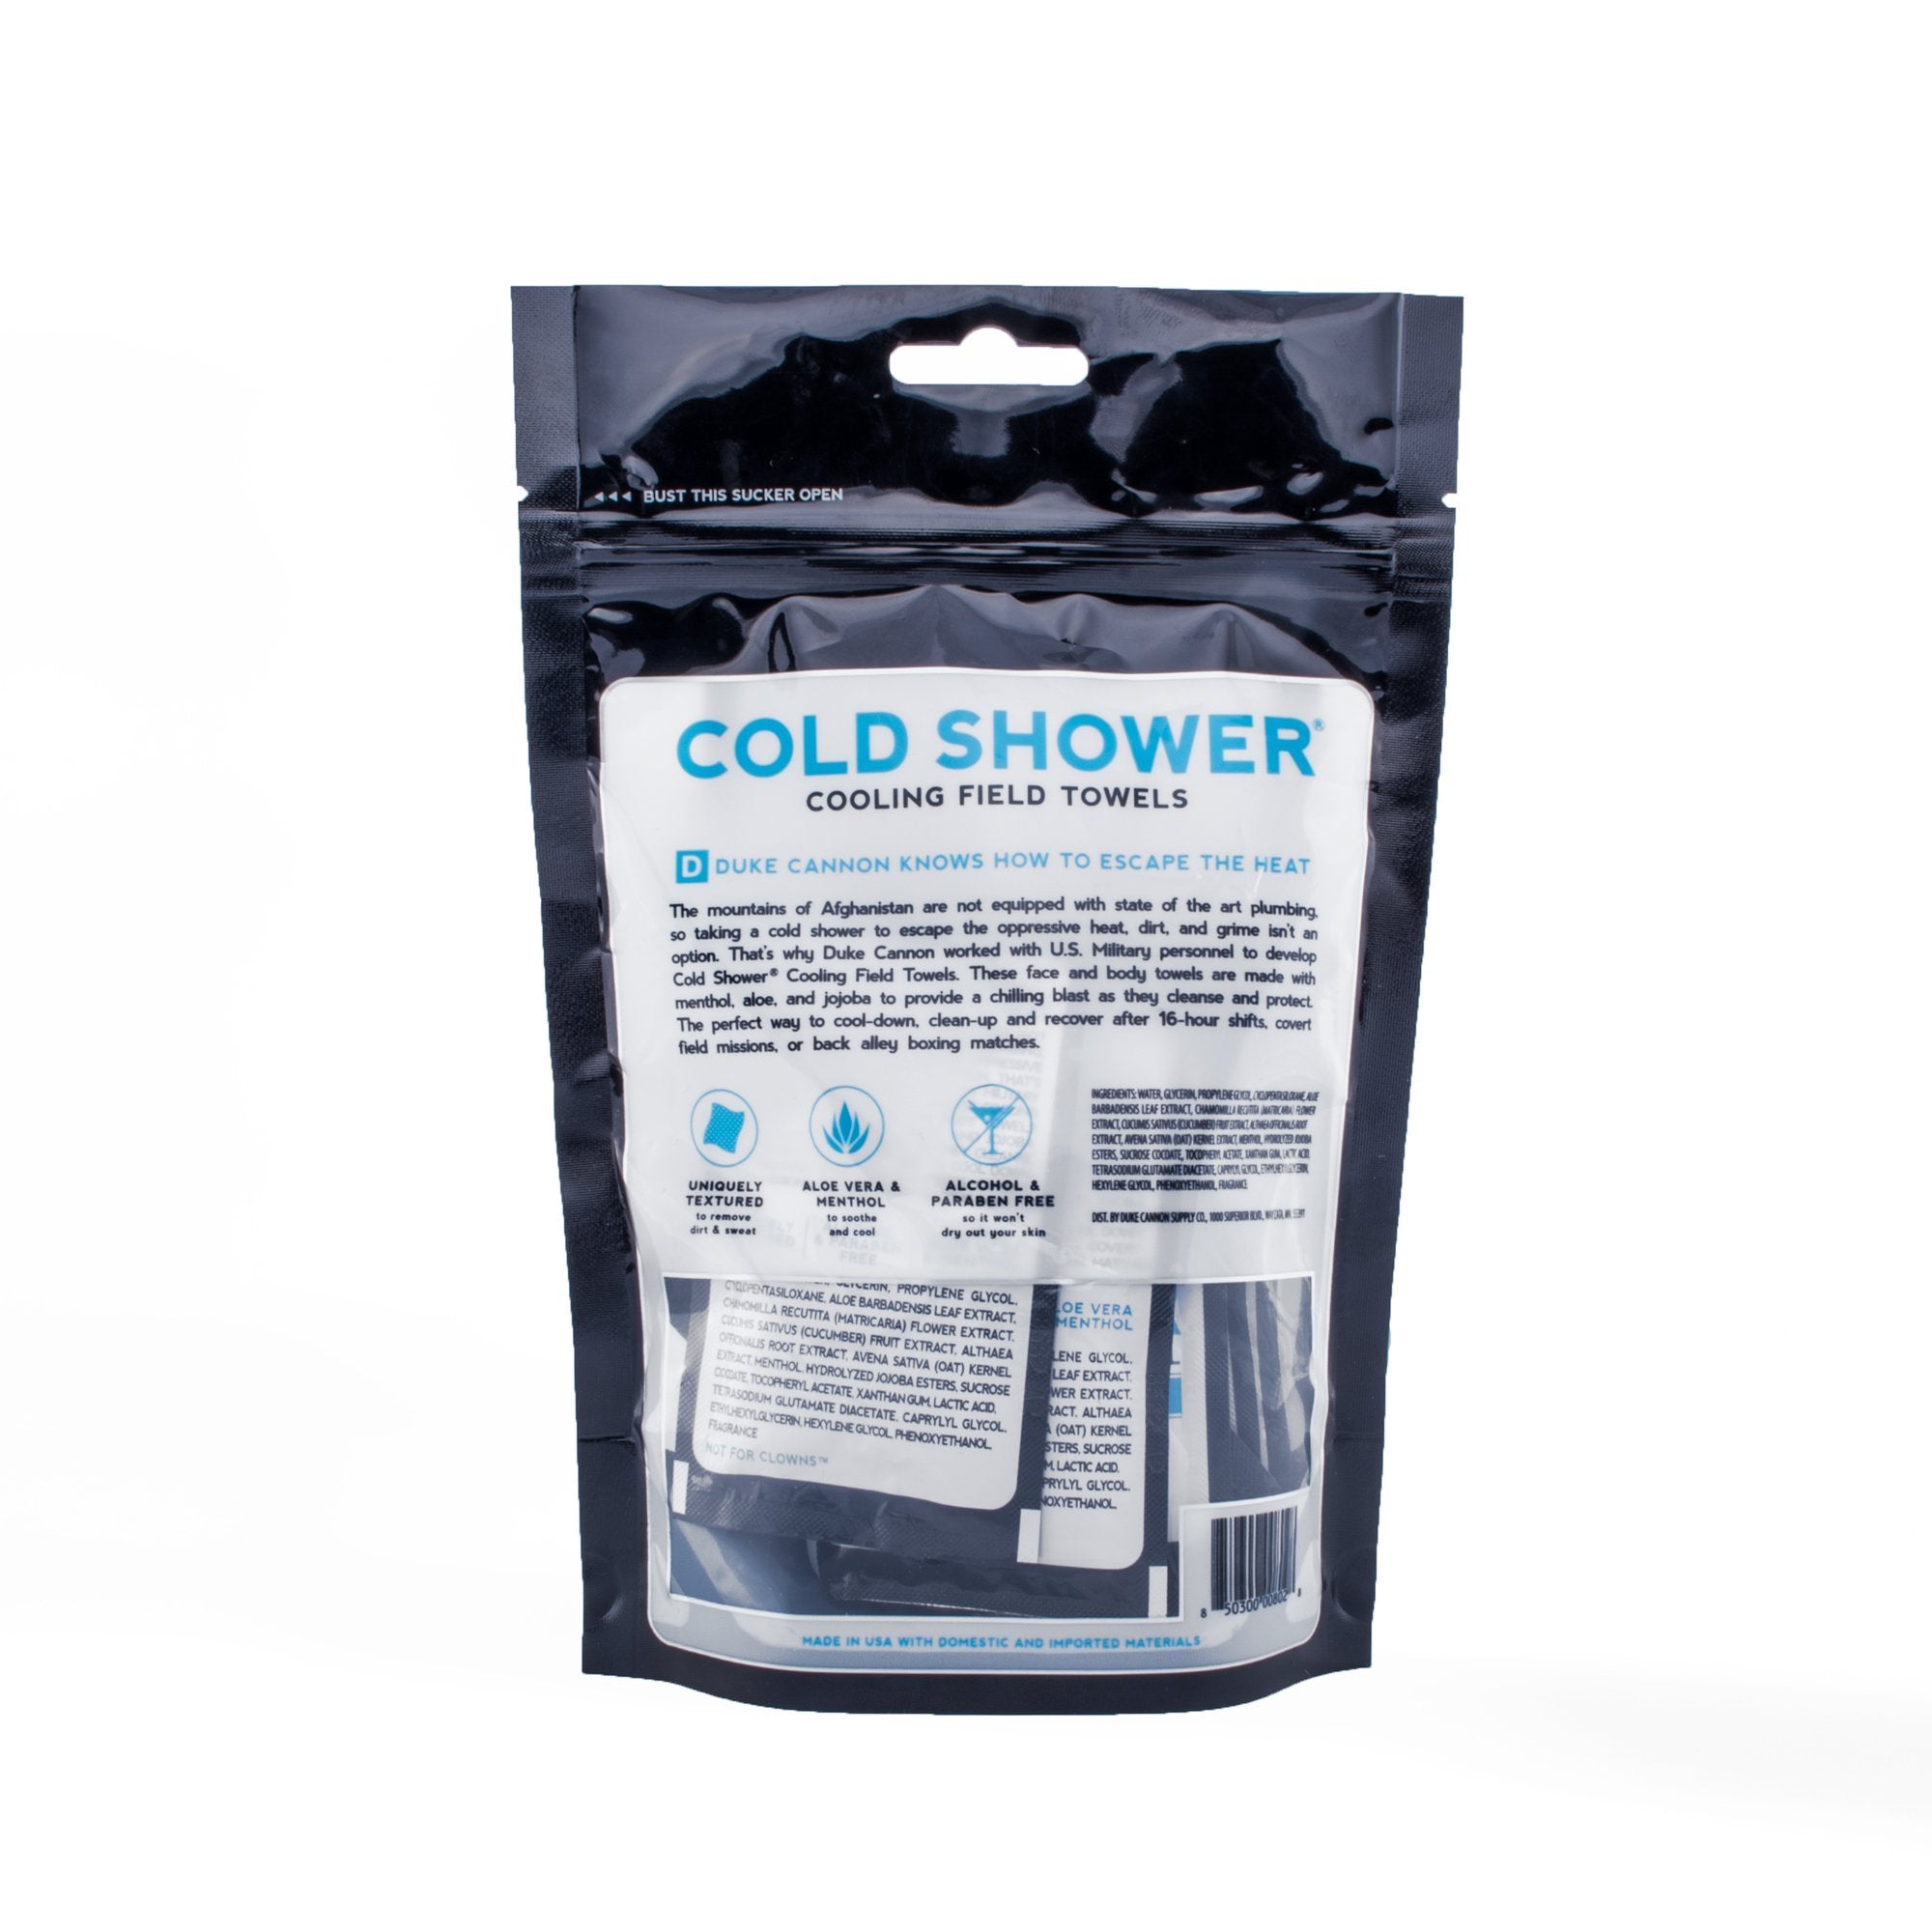 Cold Shower Cooling Field Towels - 15 pack